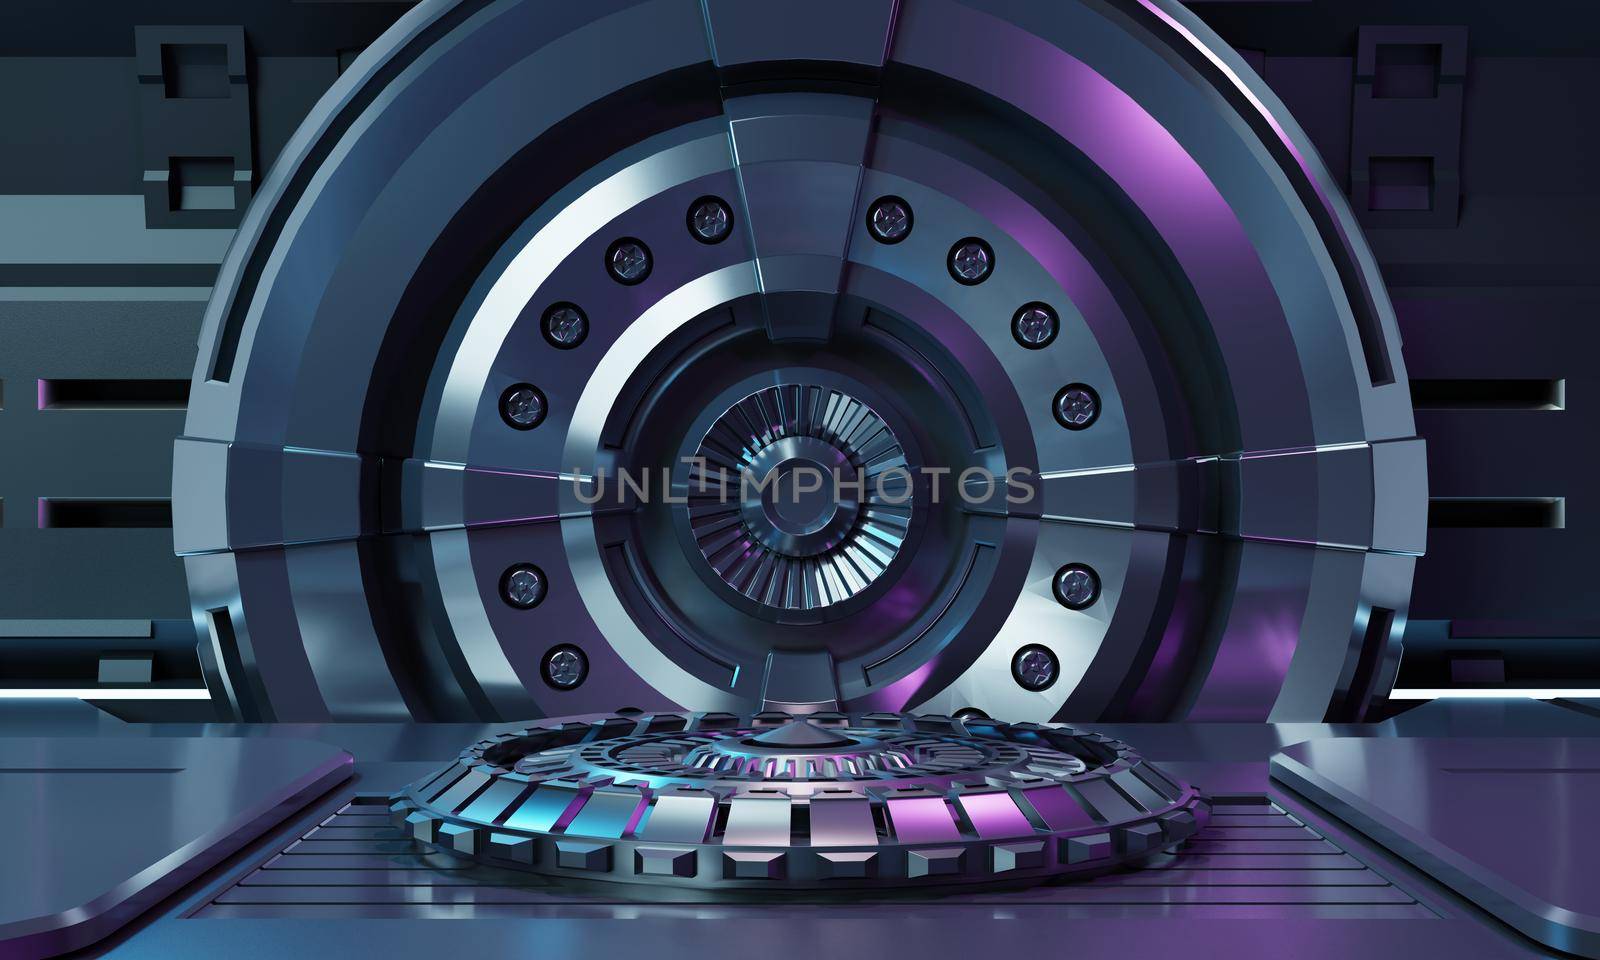 Sci-fi product podium showcase inside spaceship with security metal gate background. Technology and object concept. 3D illustration rendering by MiniStocker